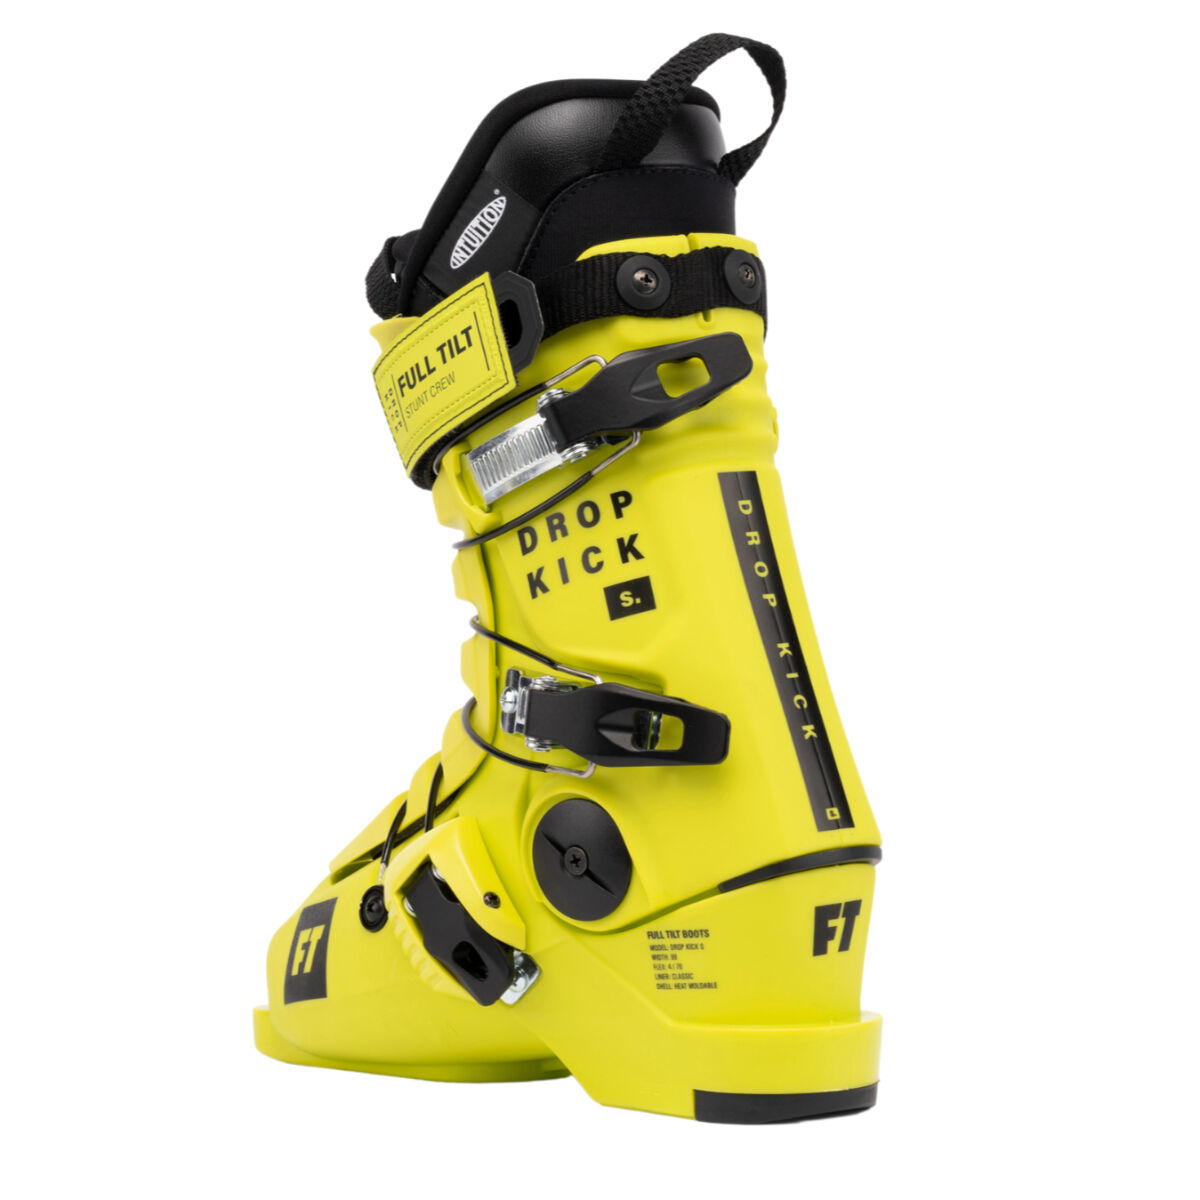 ski boots FULL TILT KONFLICT SERIES, active shock absorber, canting,  green/black ( TOP condition ) 